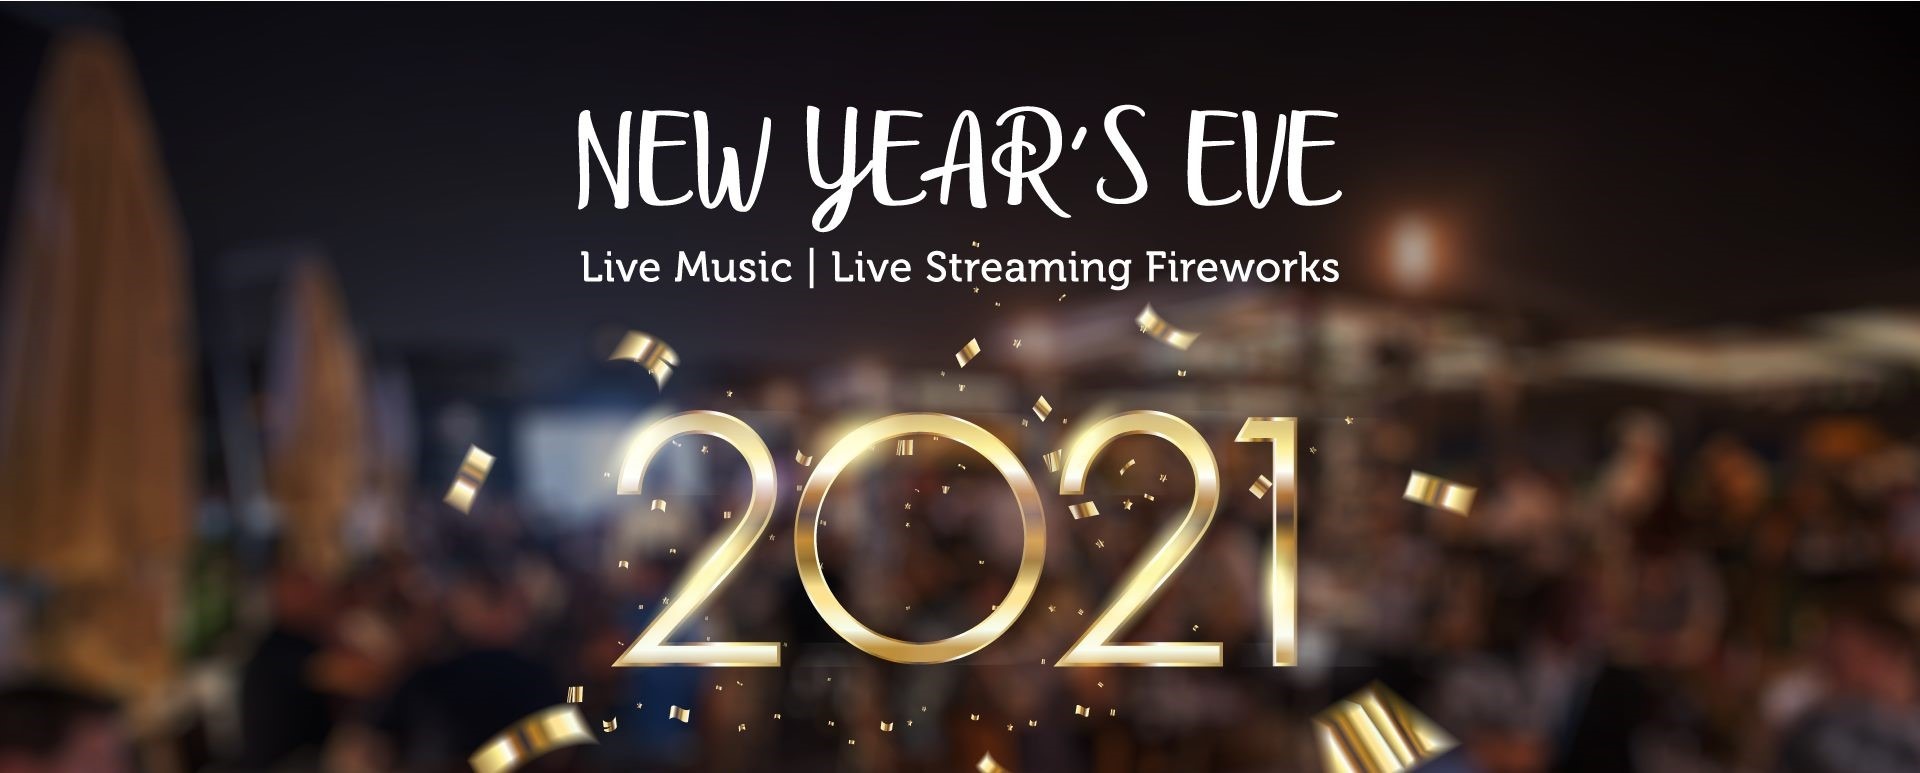 New Year’s Eve at The Irish Village - Coming Soon in UAE